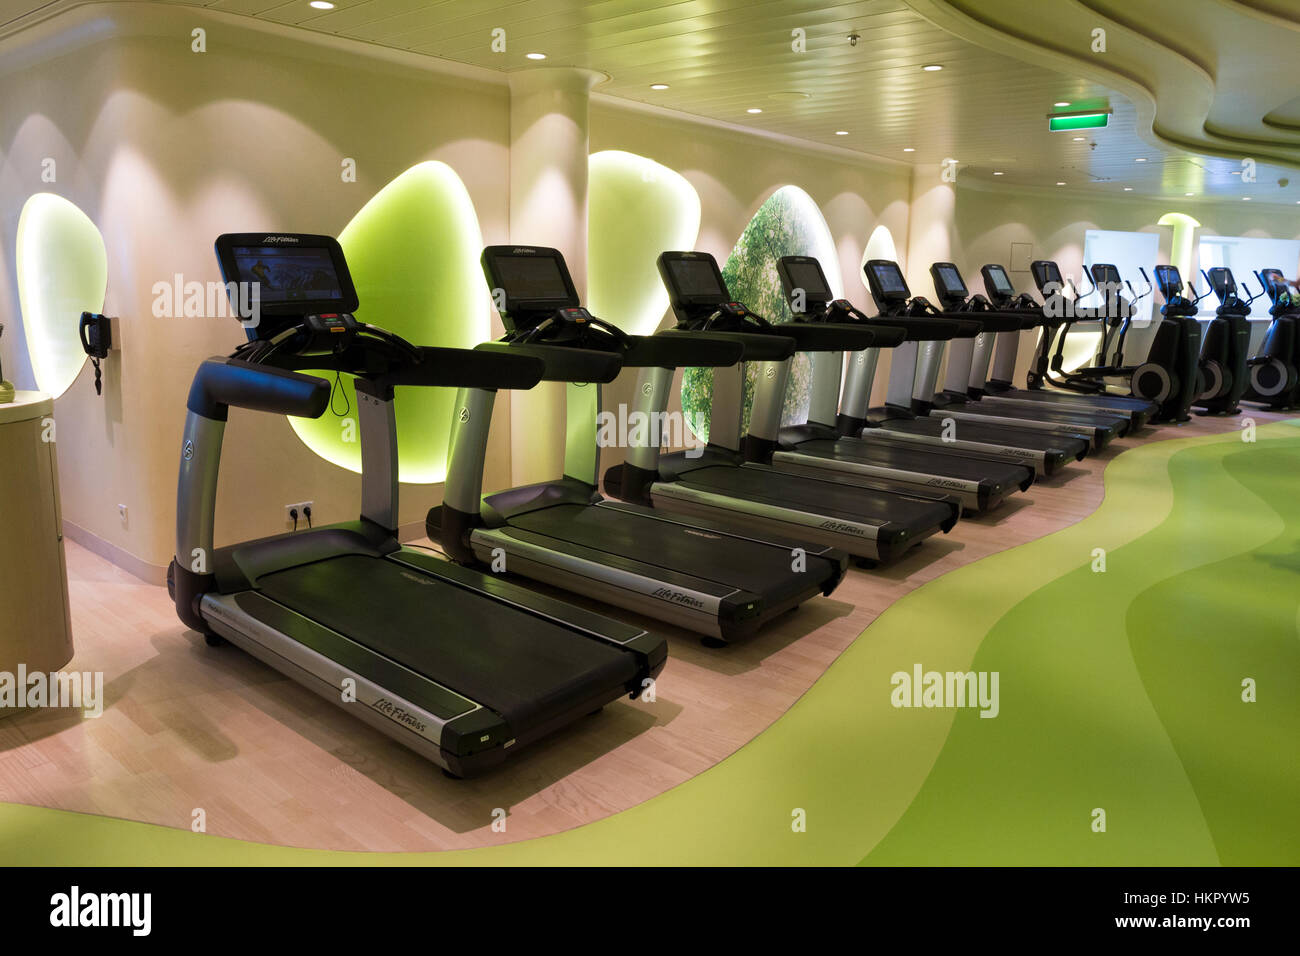 ROTTERDAM - NOV 24, 2016: Row of treadmills in the fitness center on board of the AIDAprima cruise ship. Stock Photo